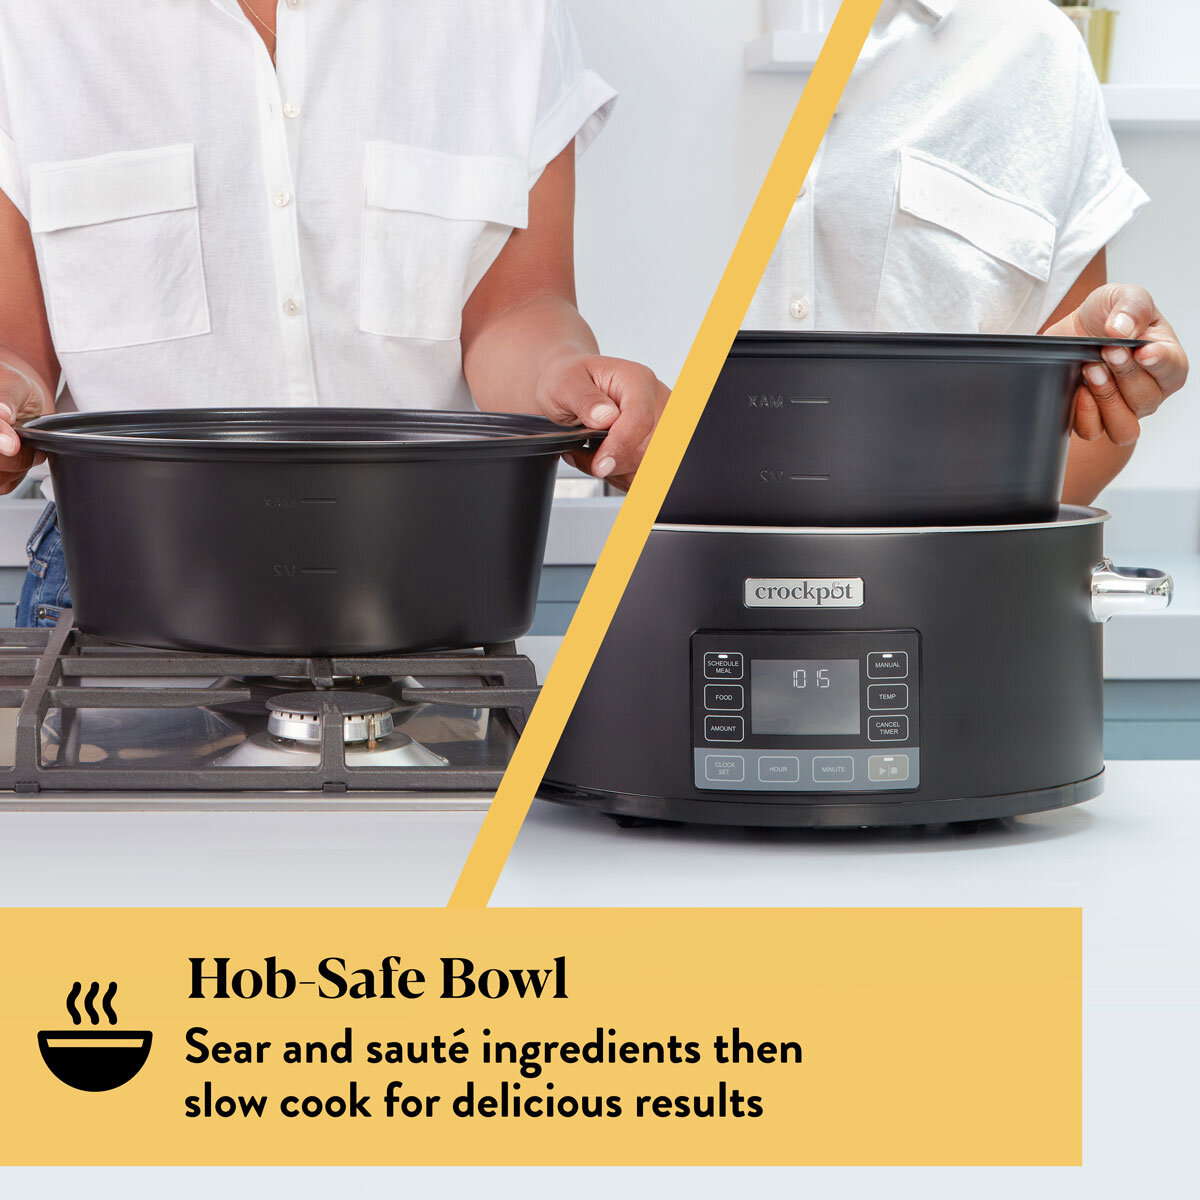 Lifestyle image showing the inner bowl is hob safe